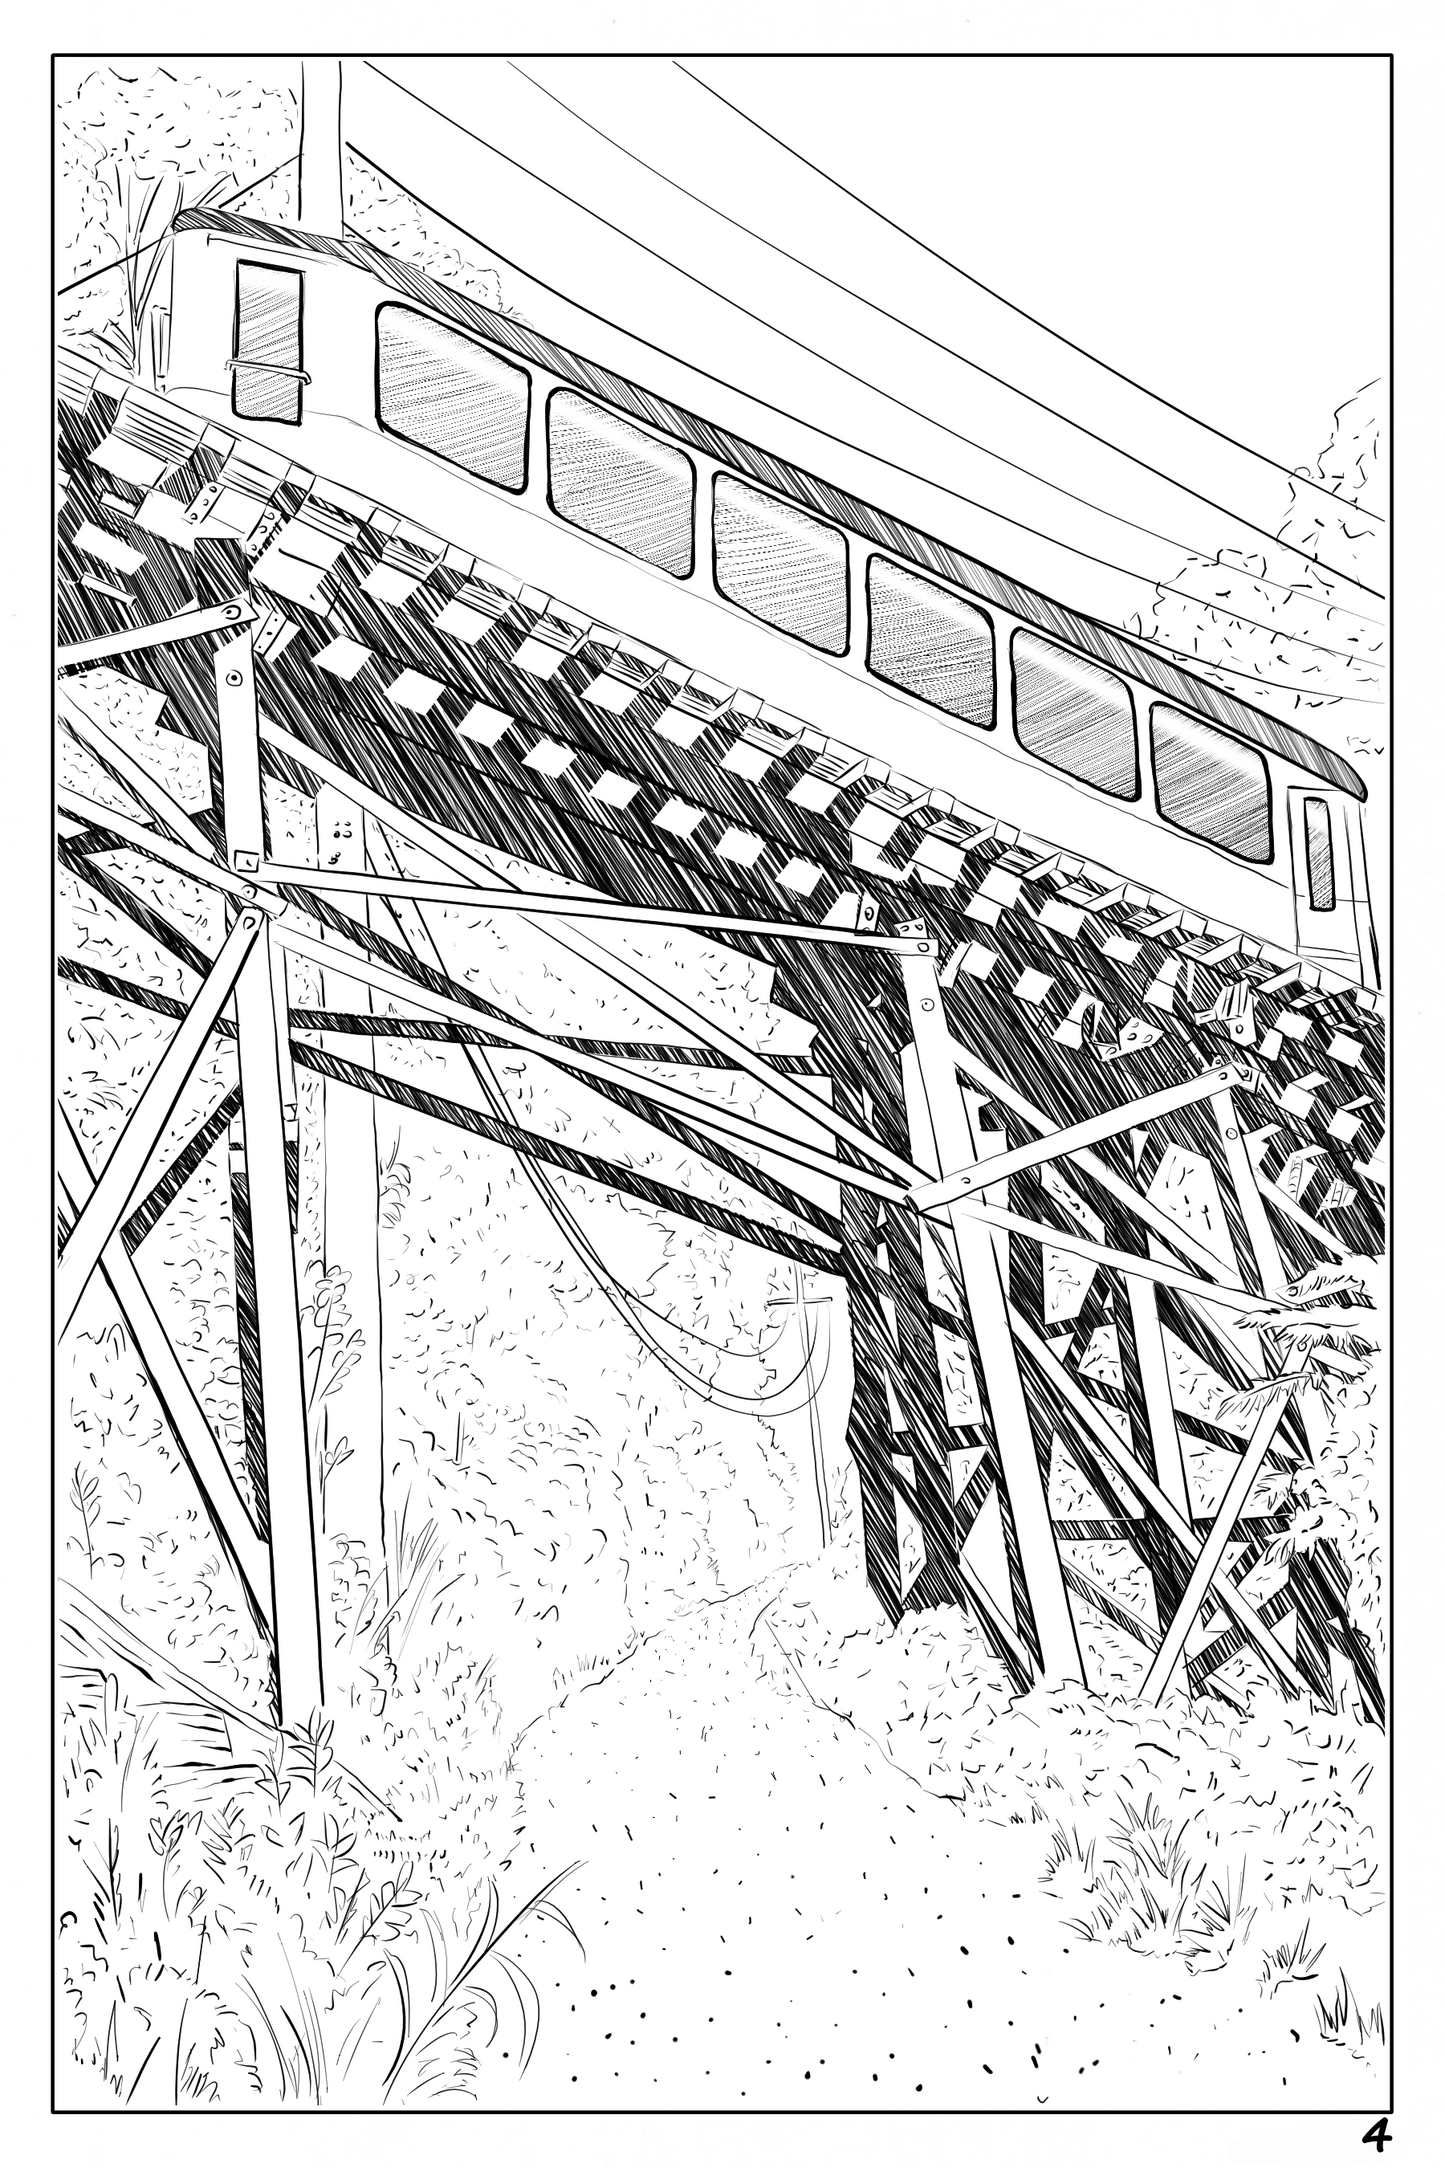 Watercolor coloring page of the Incline Railway  on Lookout mountain, 140lbs cold pressed watercolor paper